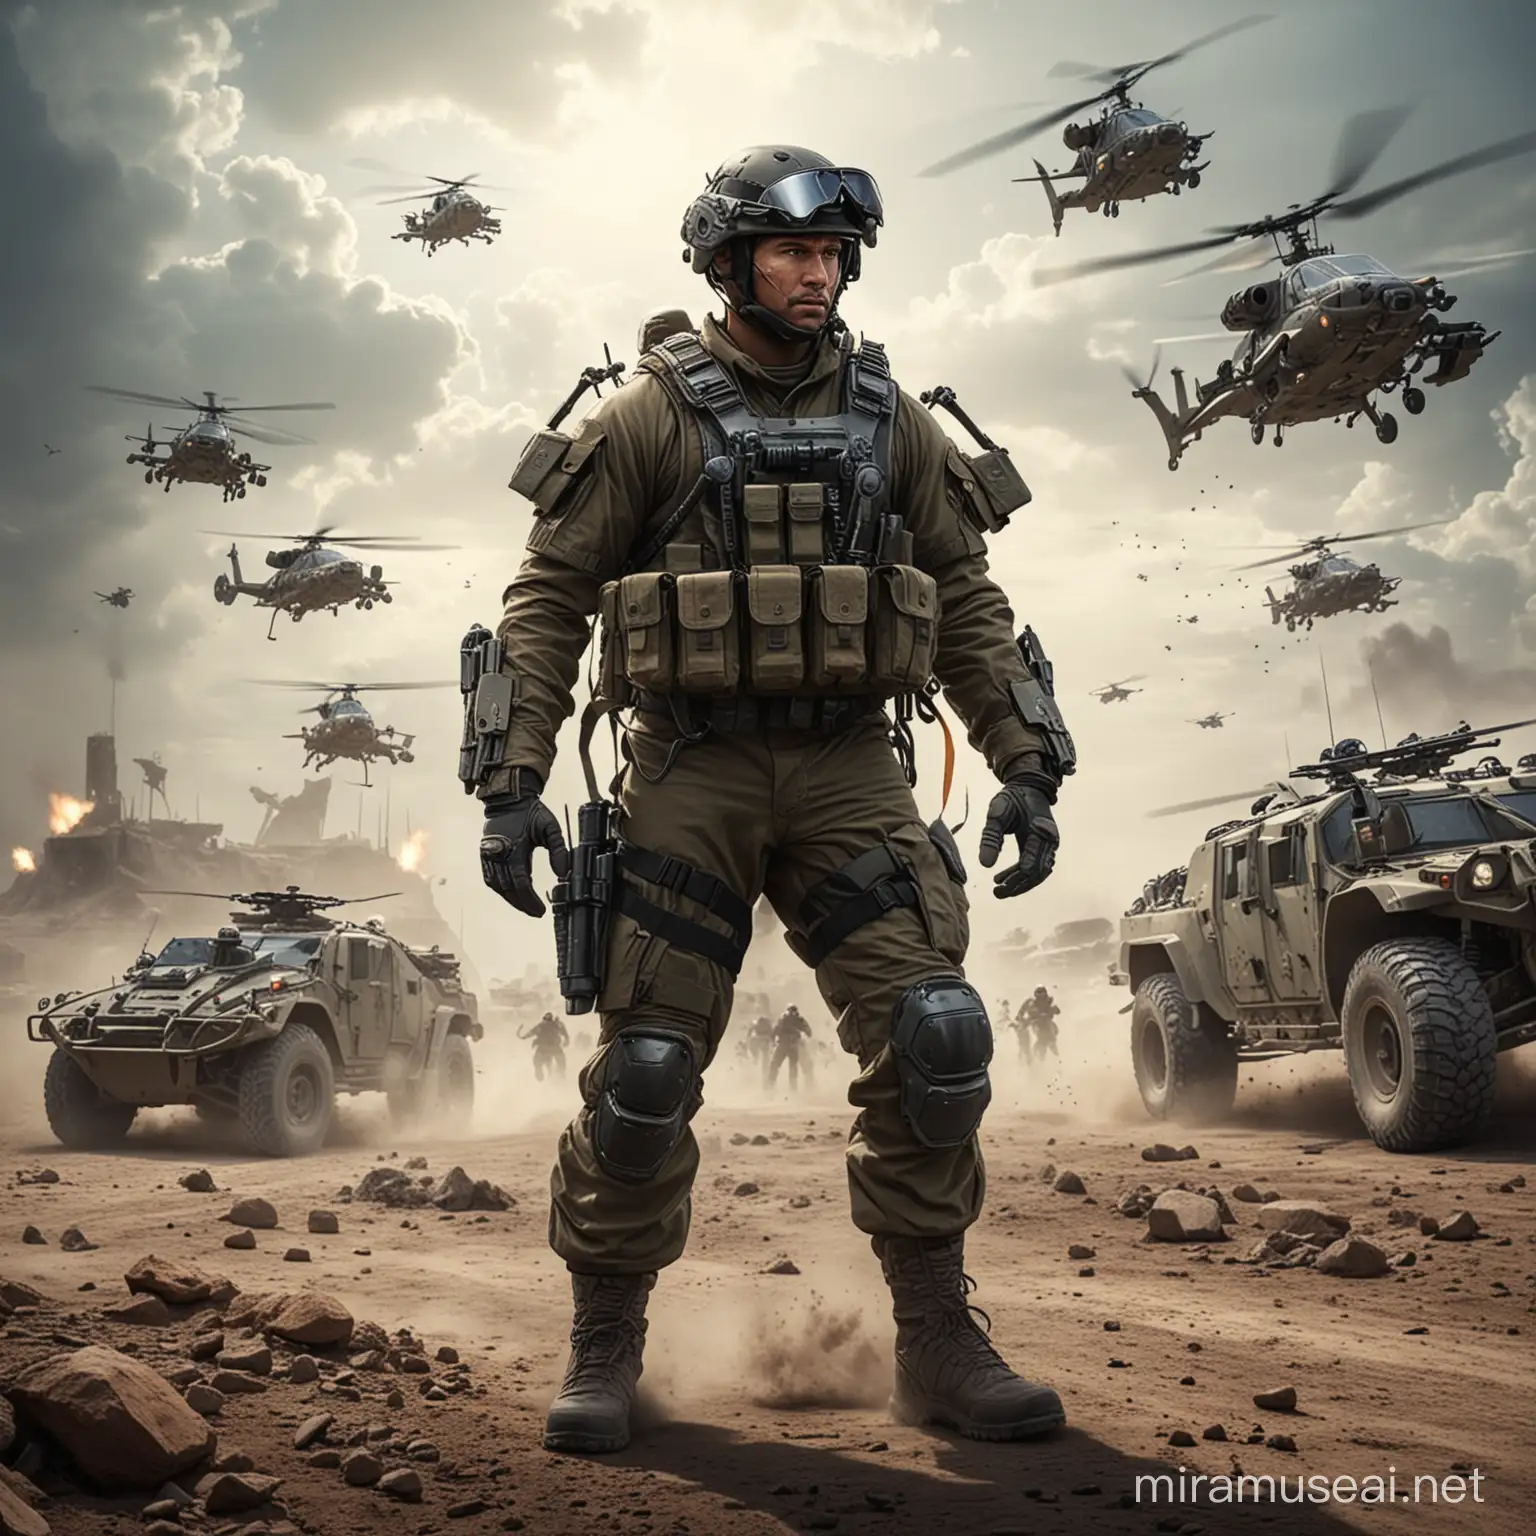 Soldier of the future with a lot of strength surrounded by teams in action helicopters and all-terrain vehicles